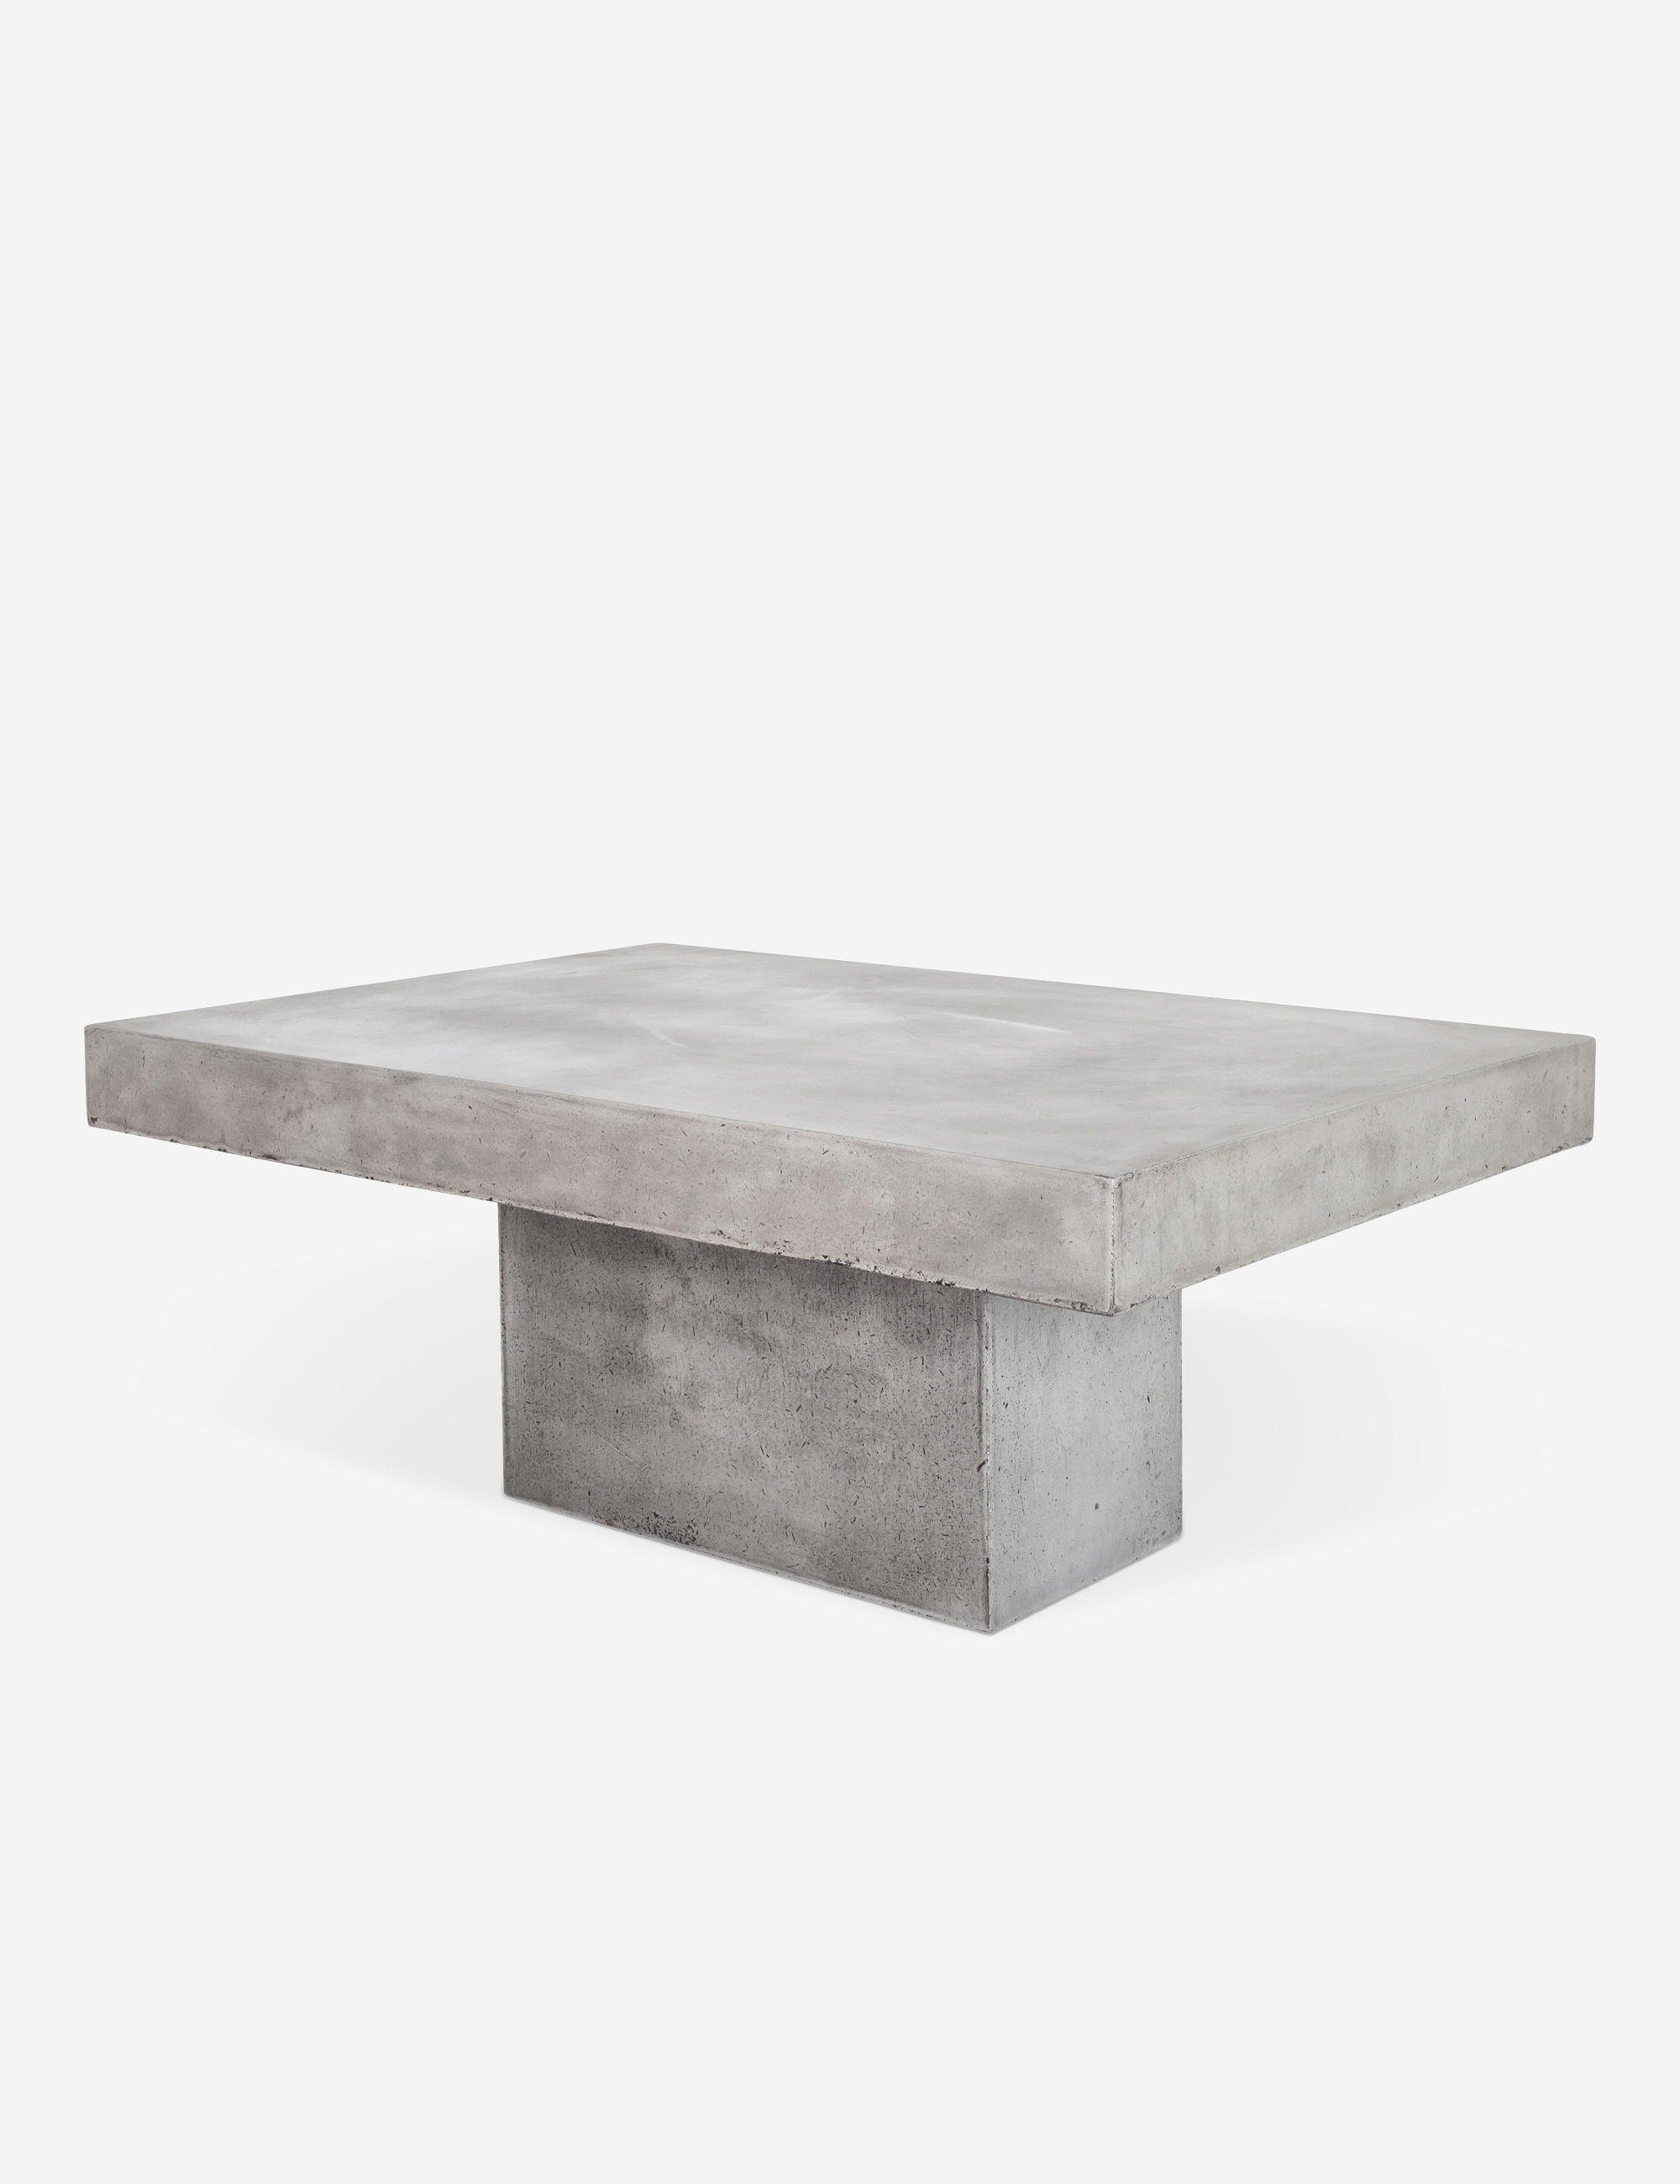 Arely Indoor / Outdoor Coffee Table - Image 1